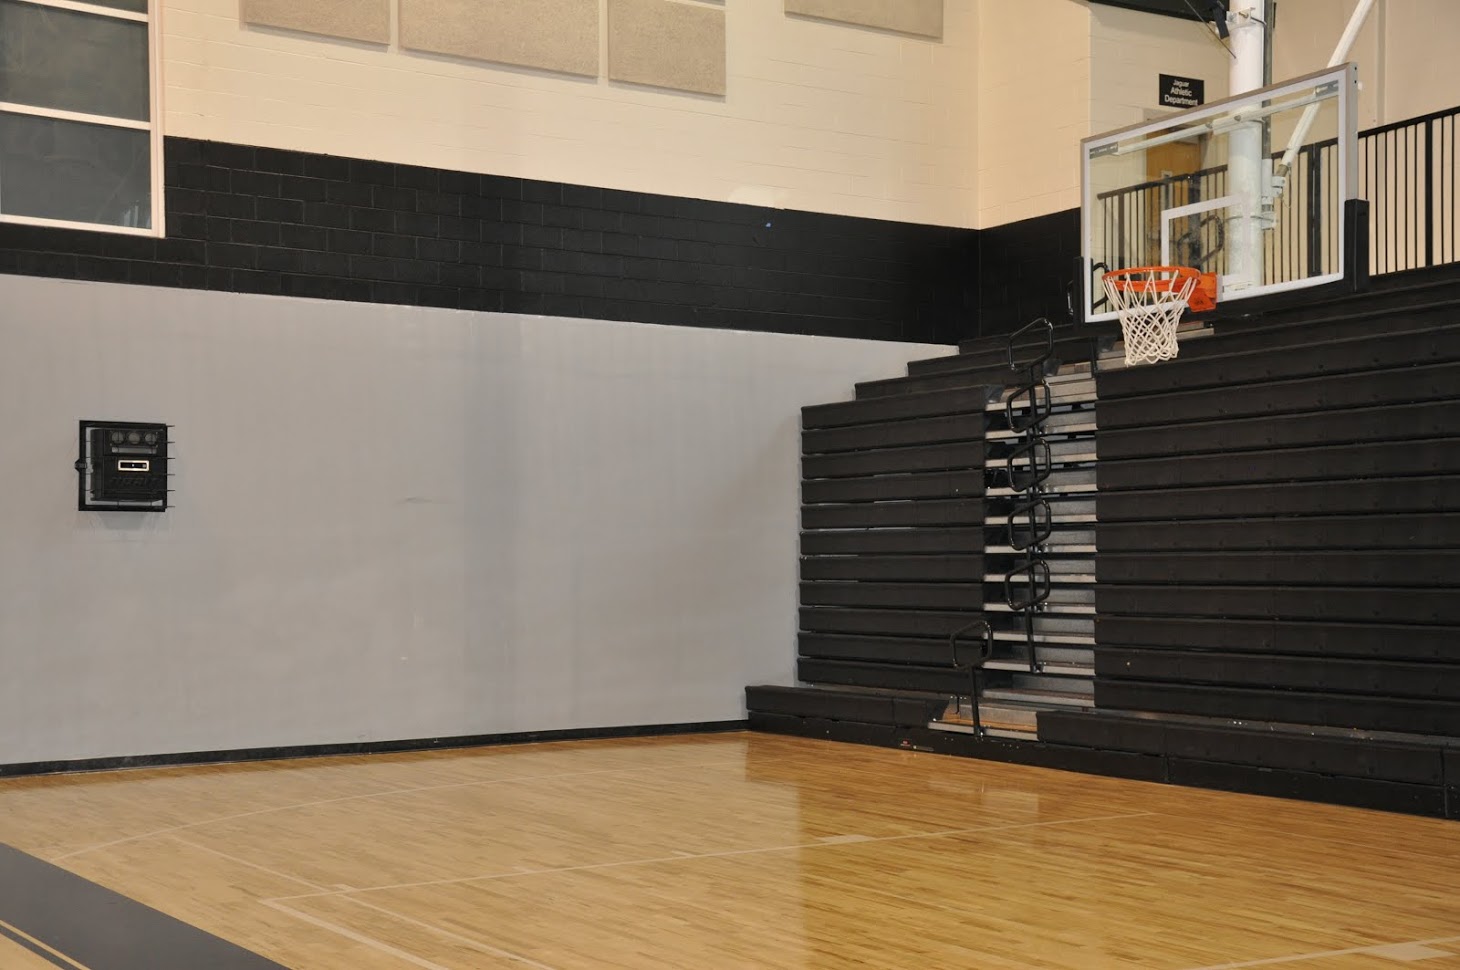 Having a Noah Shooting system will not affect the way you currently practice and can be used with multiple teams.